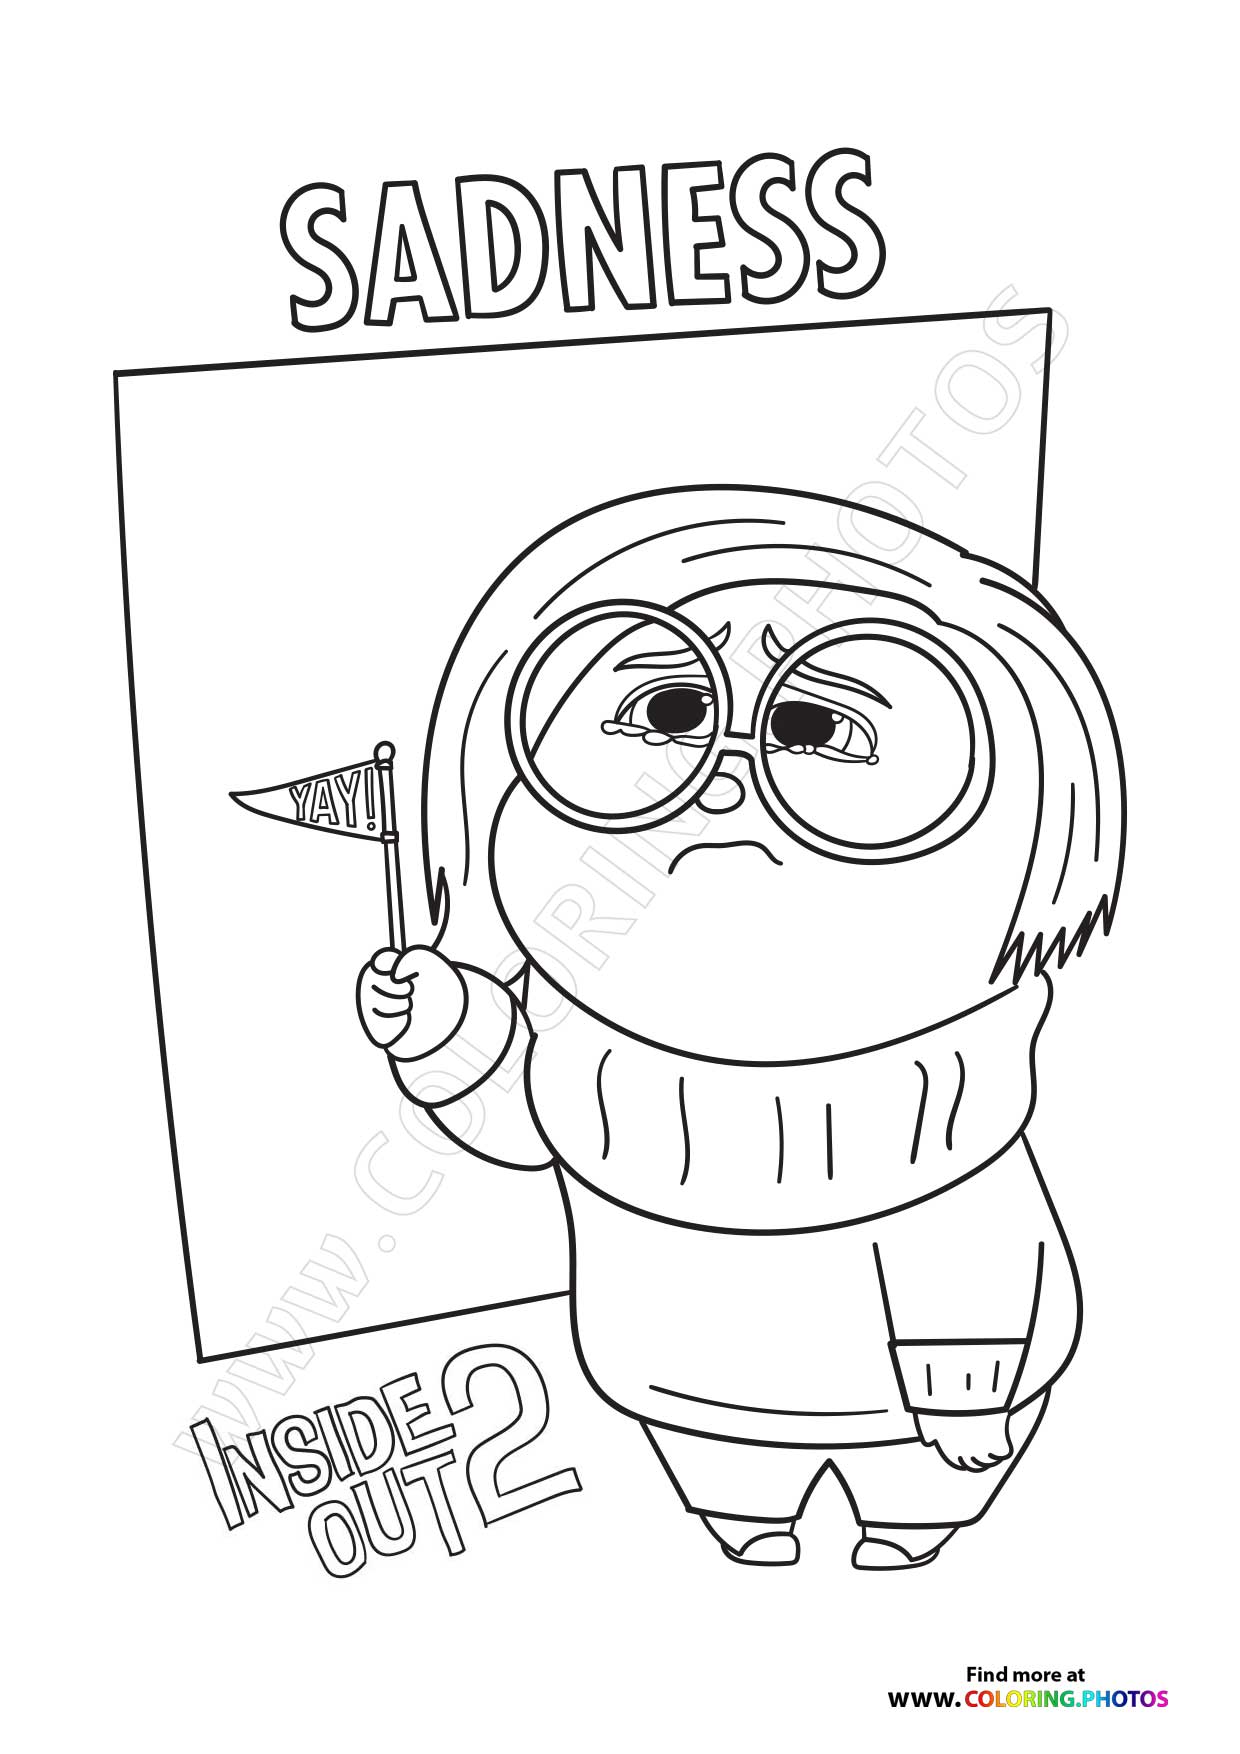 Sadness Inside Out 2 - Coloring Pages ...